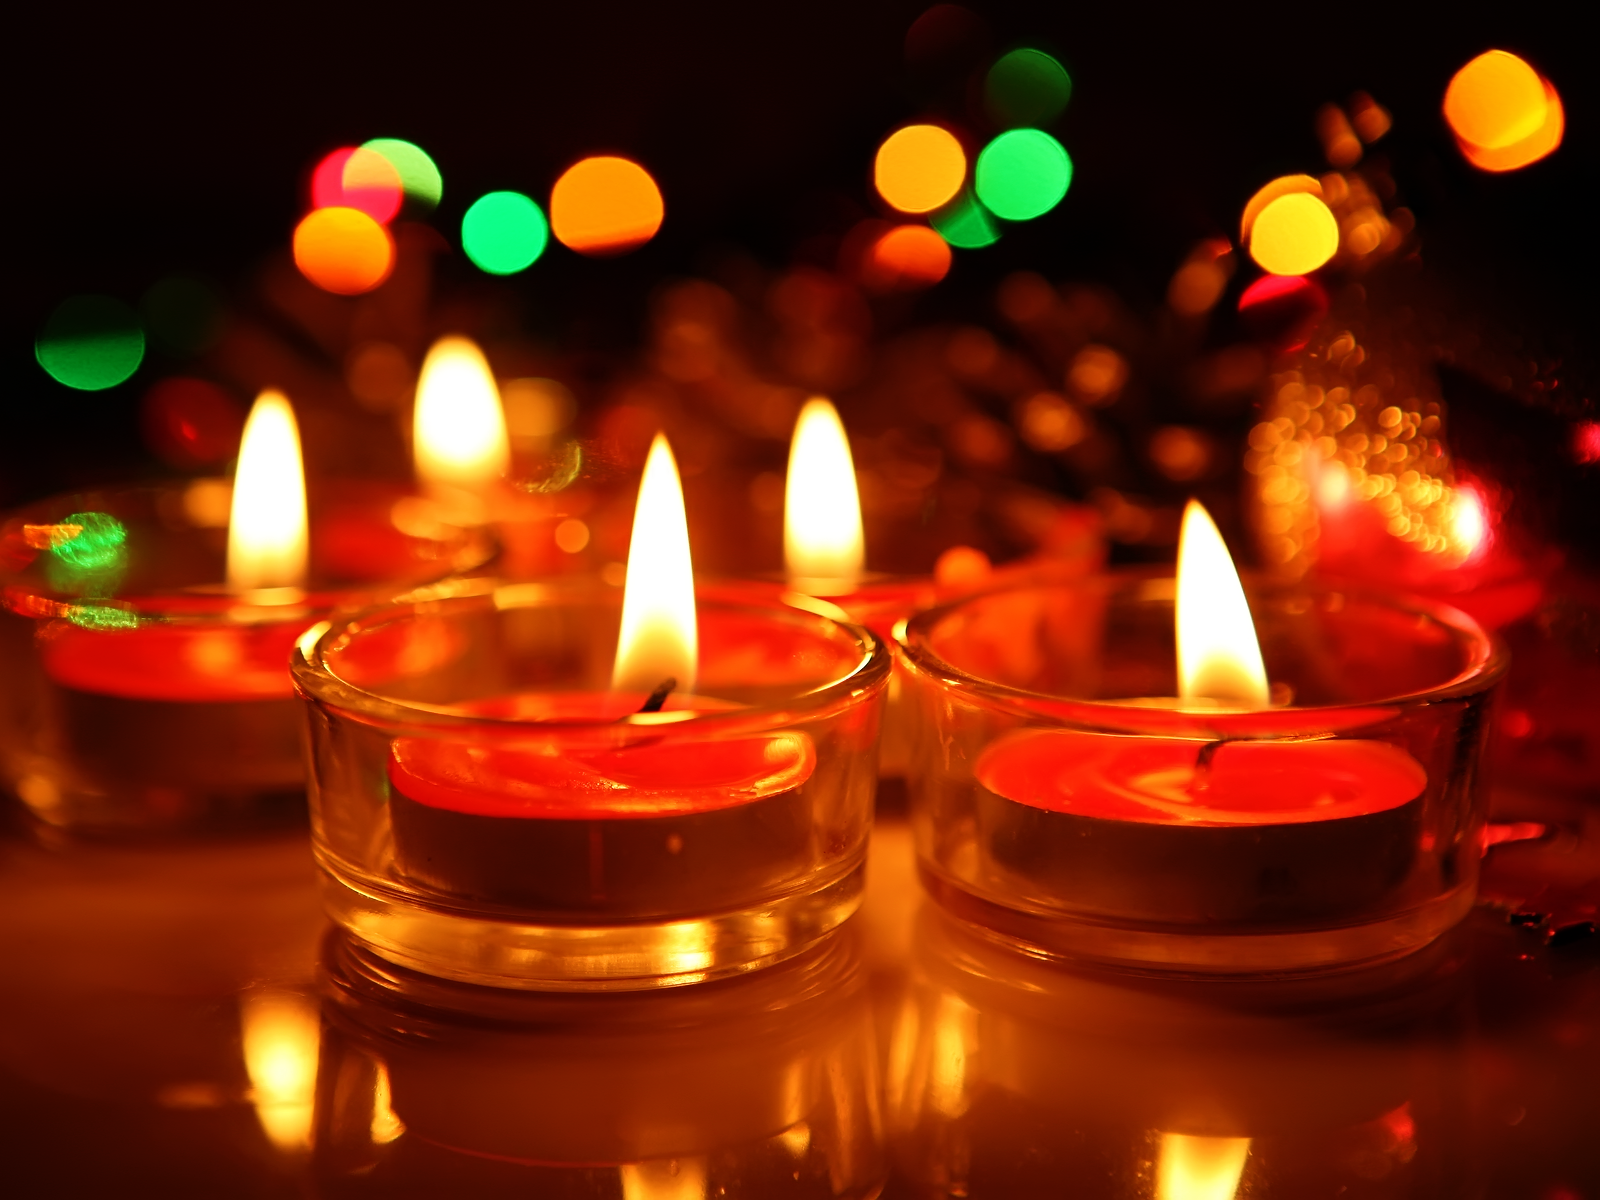 Beautiful Diwali Candles Image Floating Lamps Decoration Picture Wallpaper 2021